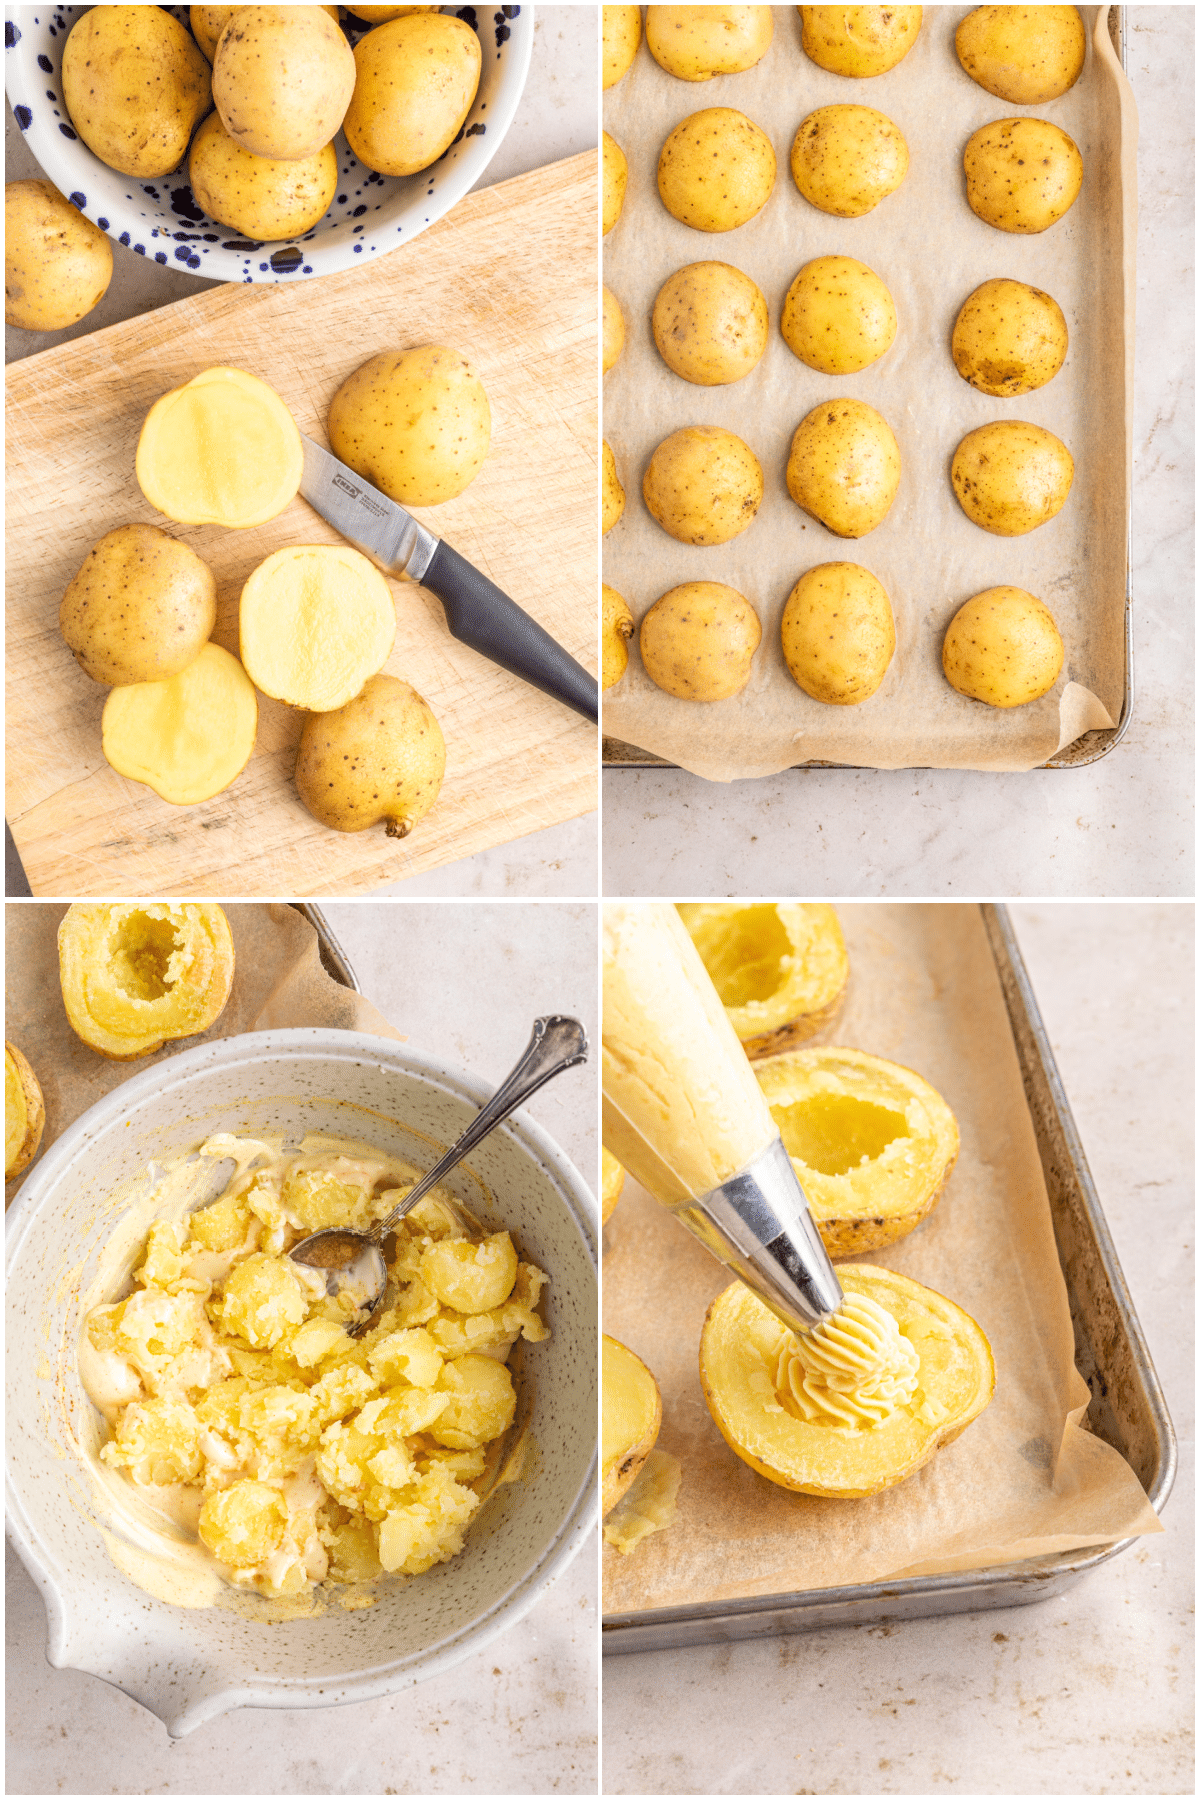 Four image collage showing how to make deviled egg potatoes: slice mini potatoes in half, arrange cut side down on parchment lined baking sheet, scoop out baked potato insides, combine with vegan mayonnaise and other ingredients, pipe filling into hollowed out potato.